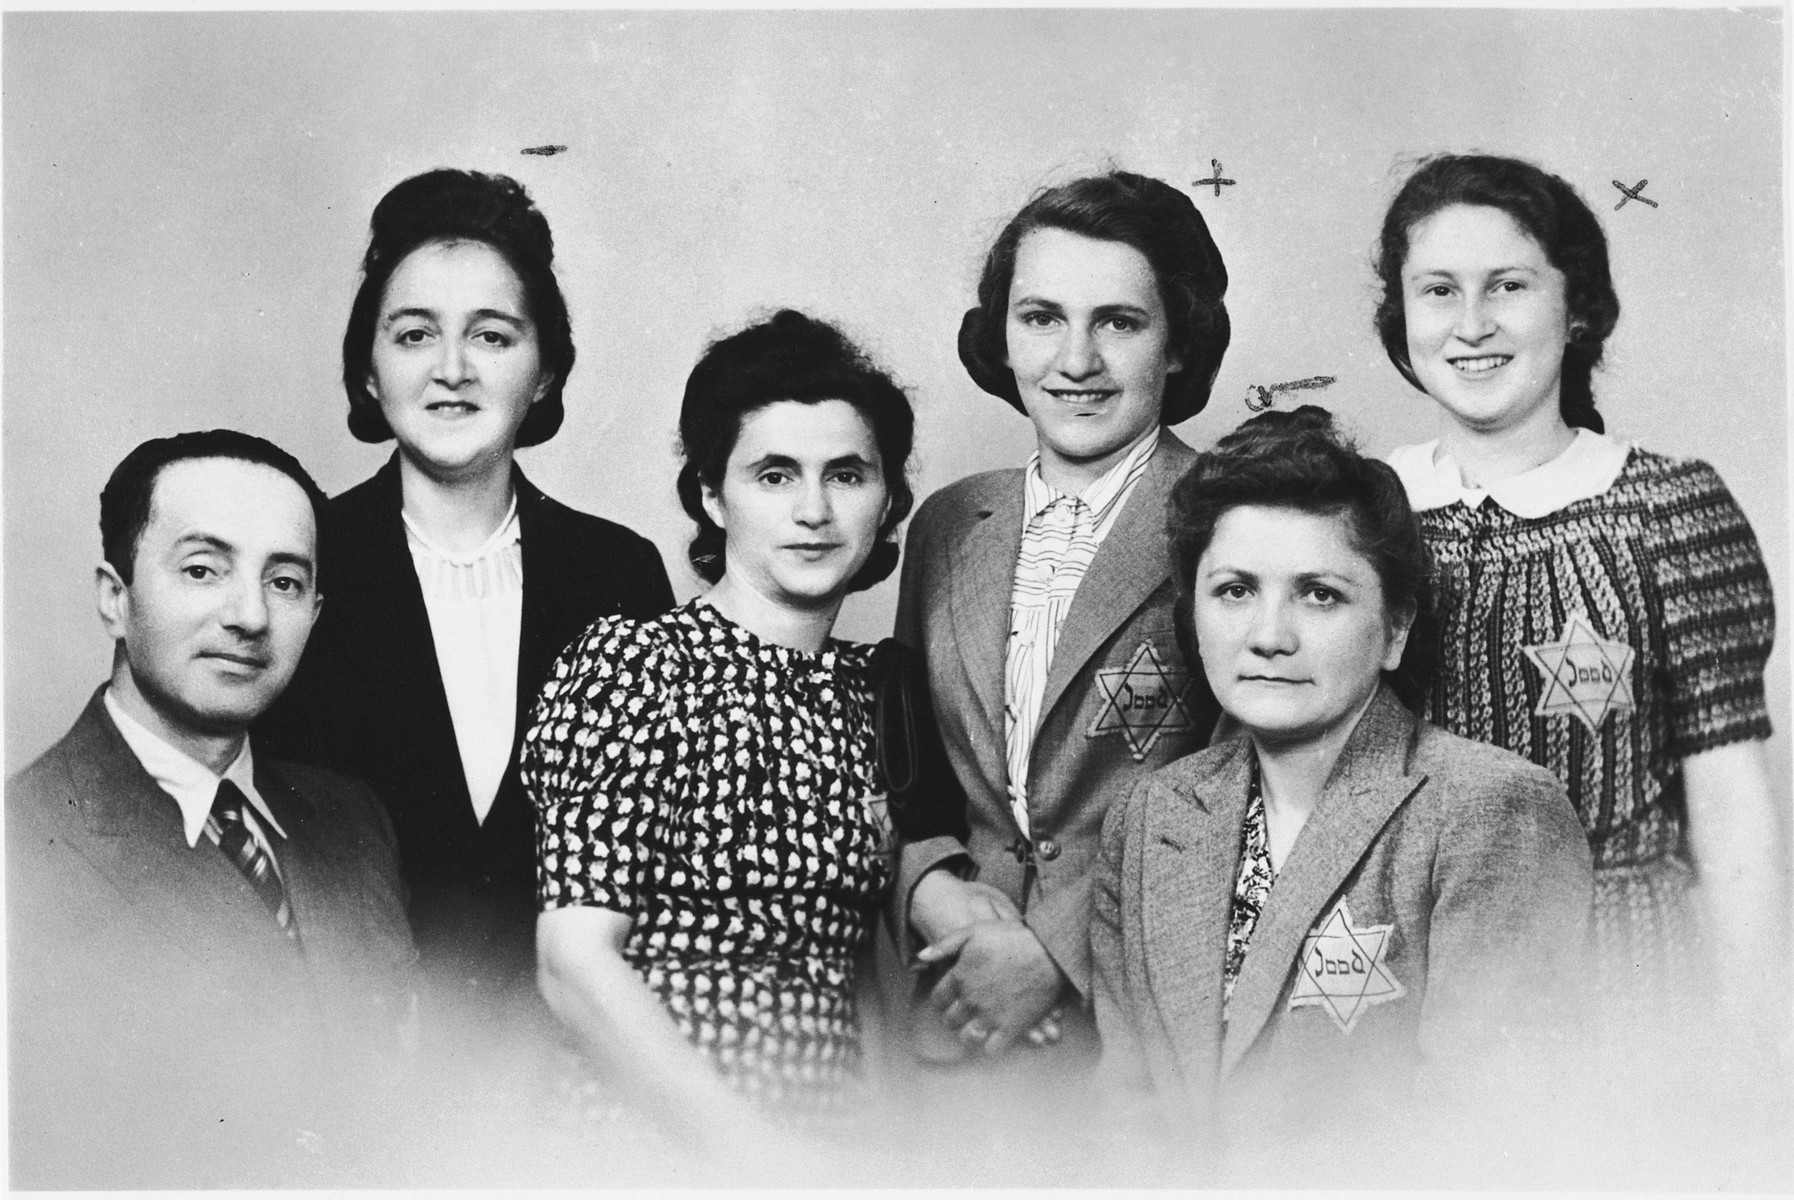 Group portrait of five Jewish women and a Jewish man, wearing Dutch Star of David badges inscribed with the word "Jood".

Pictured from left to right are: Jacob Szwajcer, Regina Malinger, Bajla (Ferens) Szwajcer, Golda Zweifach from Krakow, Klara Ringel from Ukraine and Jadzia Rosen from Warsaw.